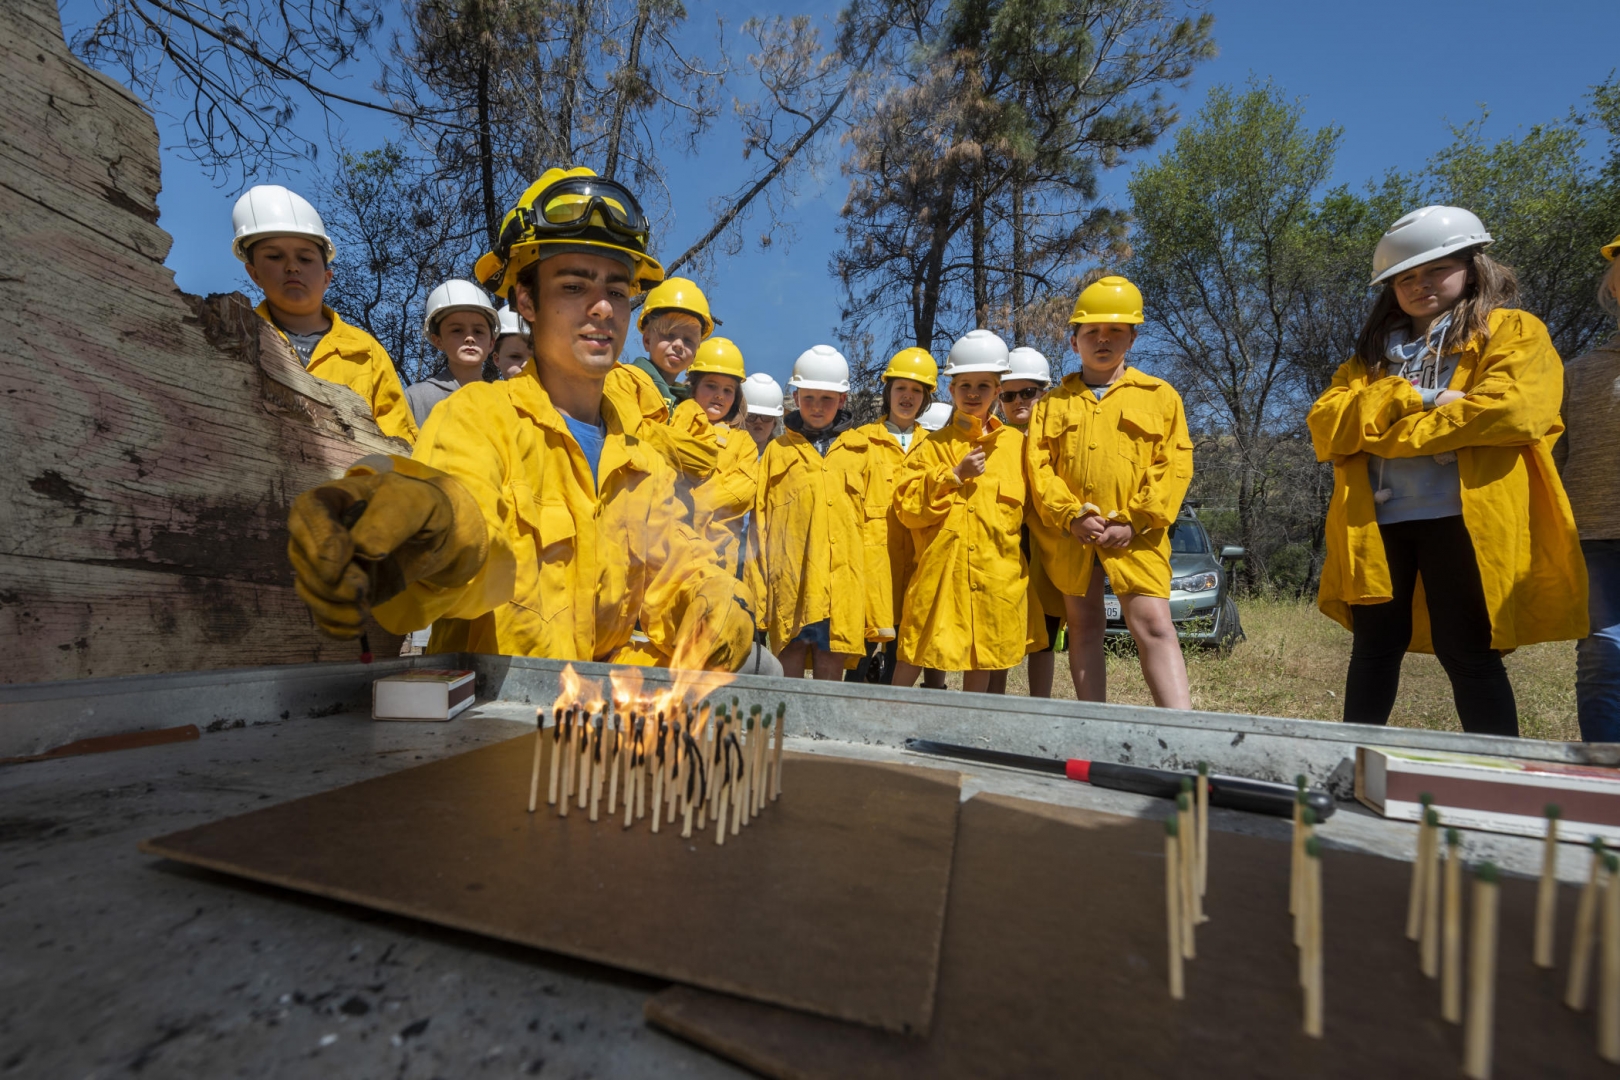 A firefighter lights a grove of matches standing upright on a flat surface as fourth graders watch behind him in protective yellow clothes.